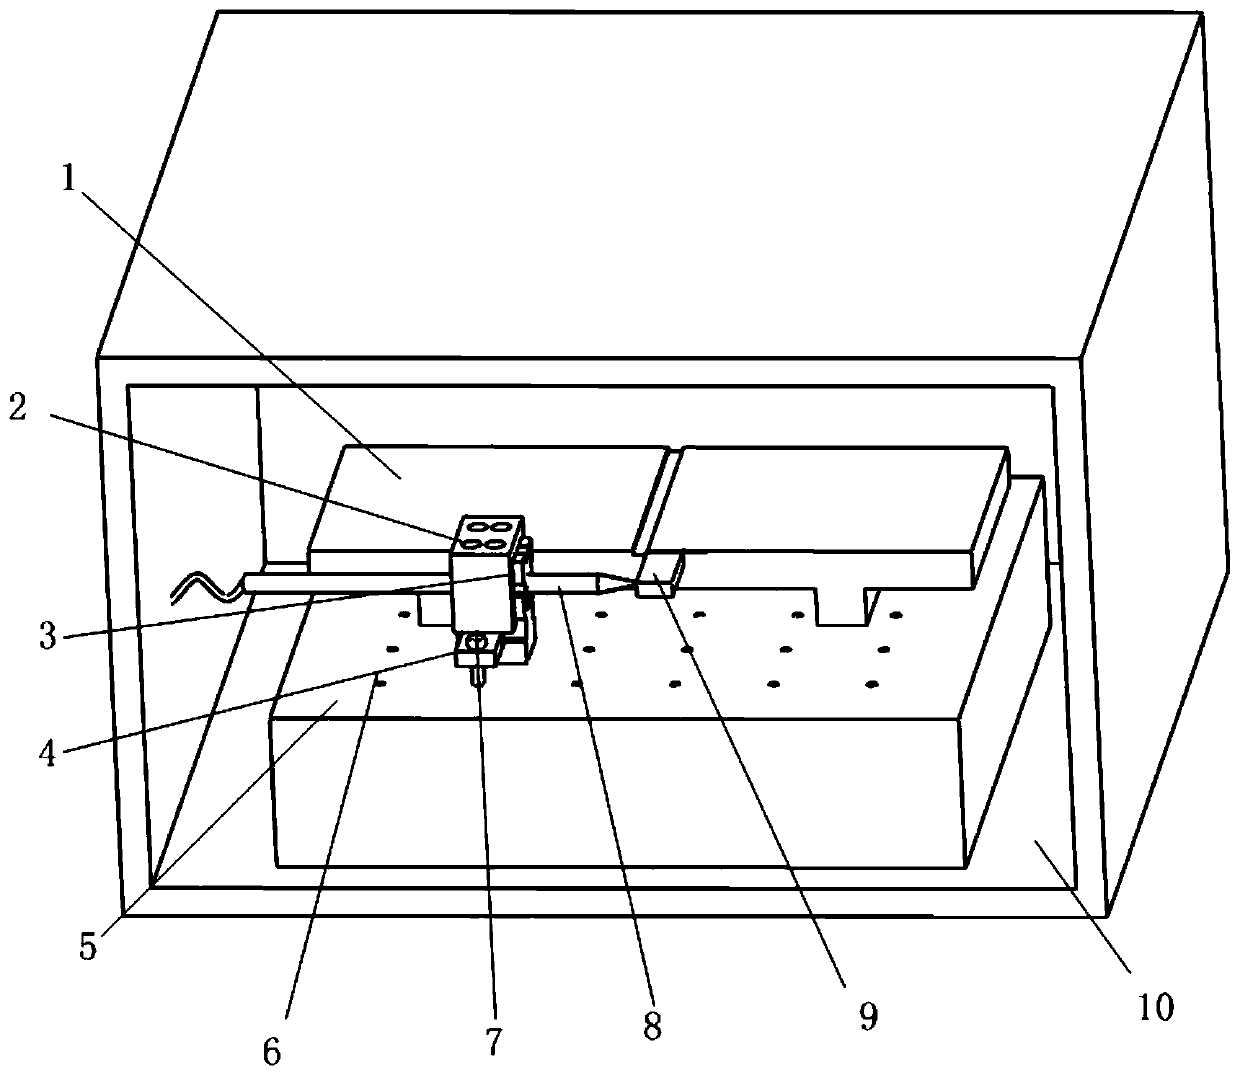 An experimental device for measuring the critical point of thermal deformation of a CNC machine tool bed and its determination method